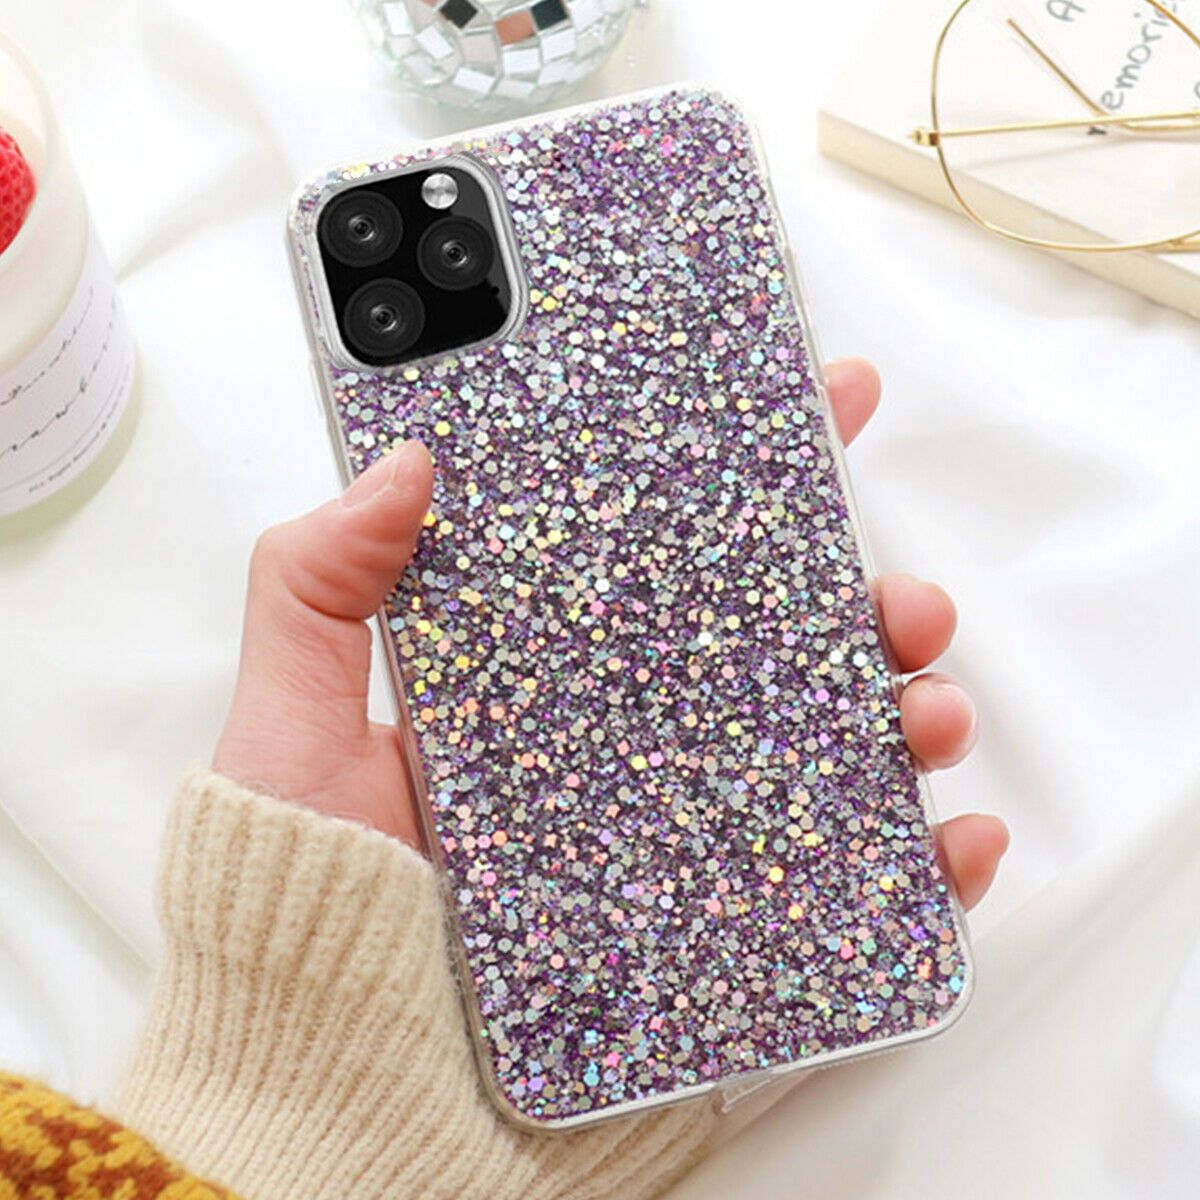 For Iphone 11 Pro Max 8 Plus 7 XS Max XR Cute Bling Glitter Girls Women Case Cover casedeal2000 For Apple iPhone 11 Pro Max Purple (Bling Back & Clear Bumper) 